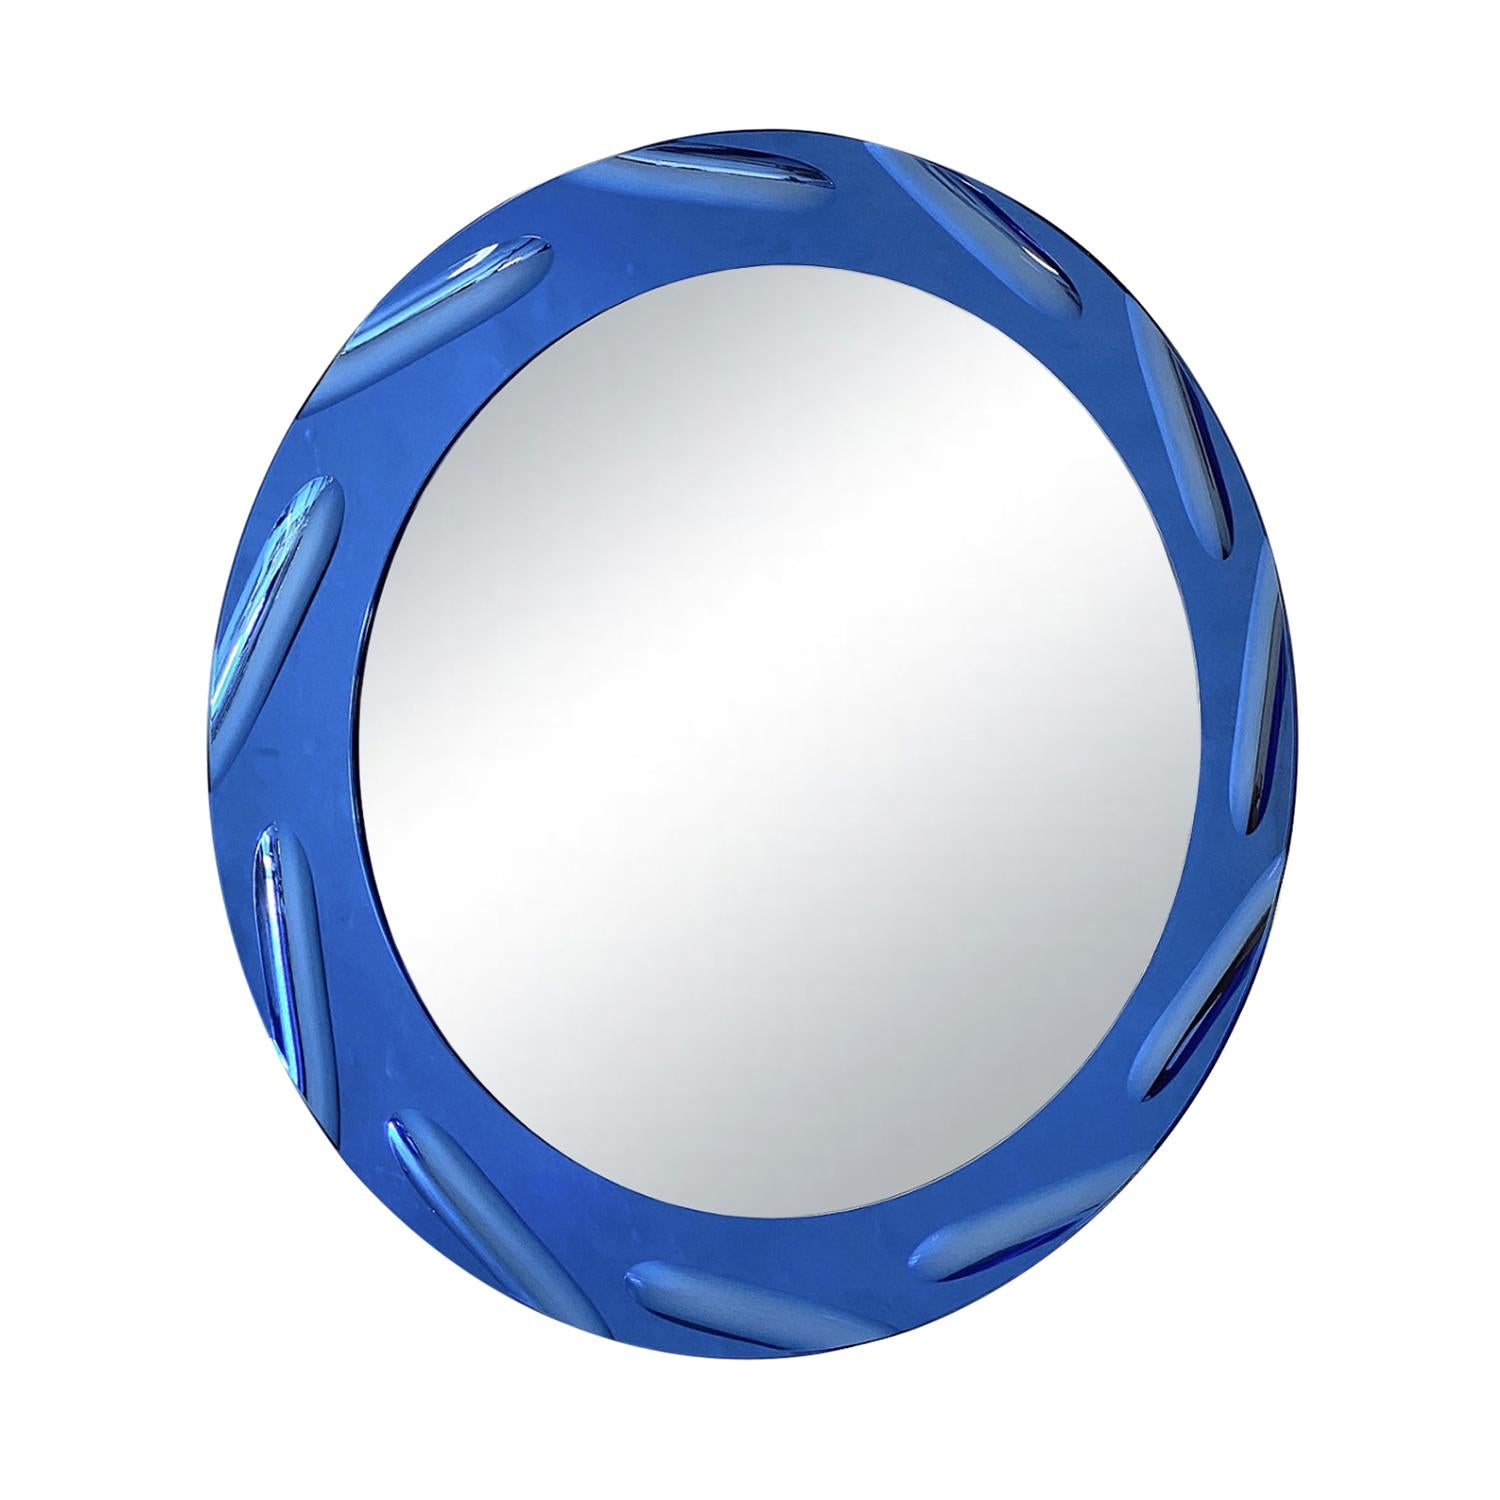 A dark-blue, vintage Mid-Century Modern Italian wall mirror made of hand blown cut crystal glass with its original colorful mirror glass, produced by Cristal Art in good condition. The round décor piece is enhanced by detailed glass art. Wear